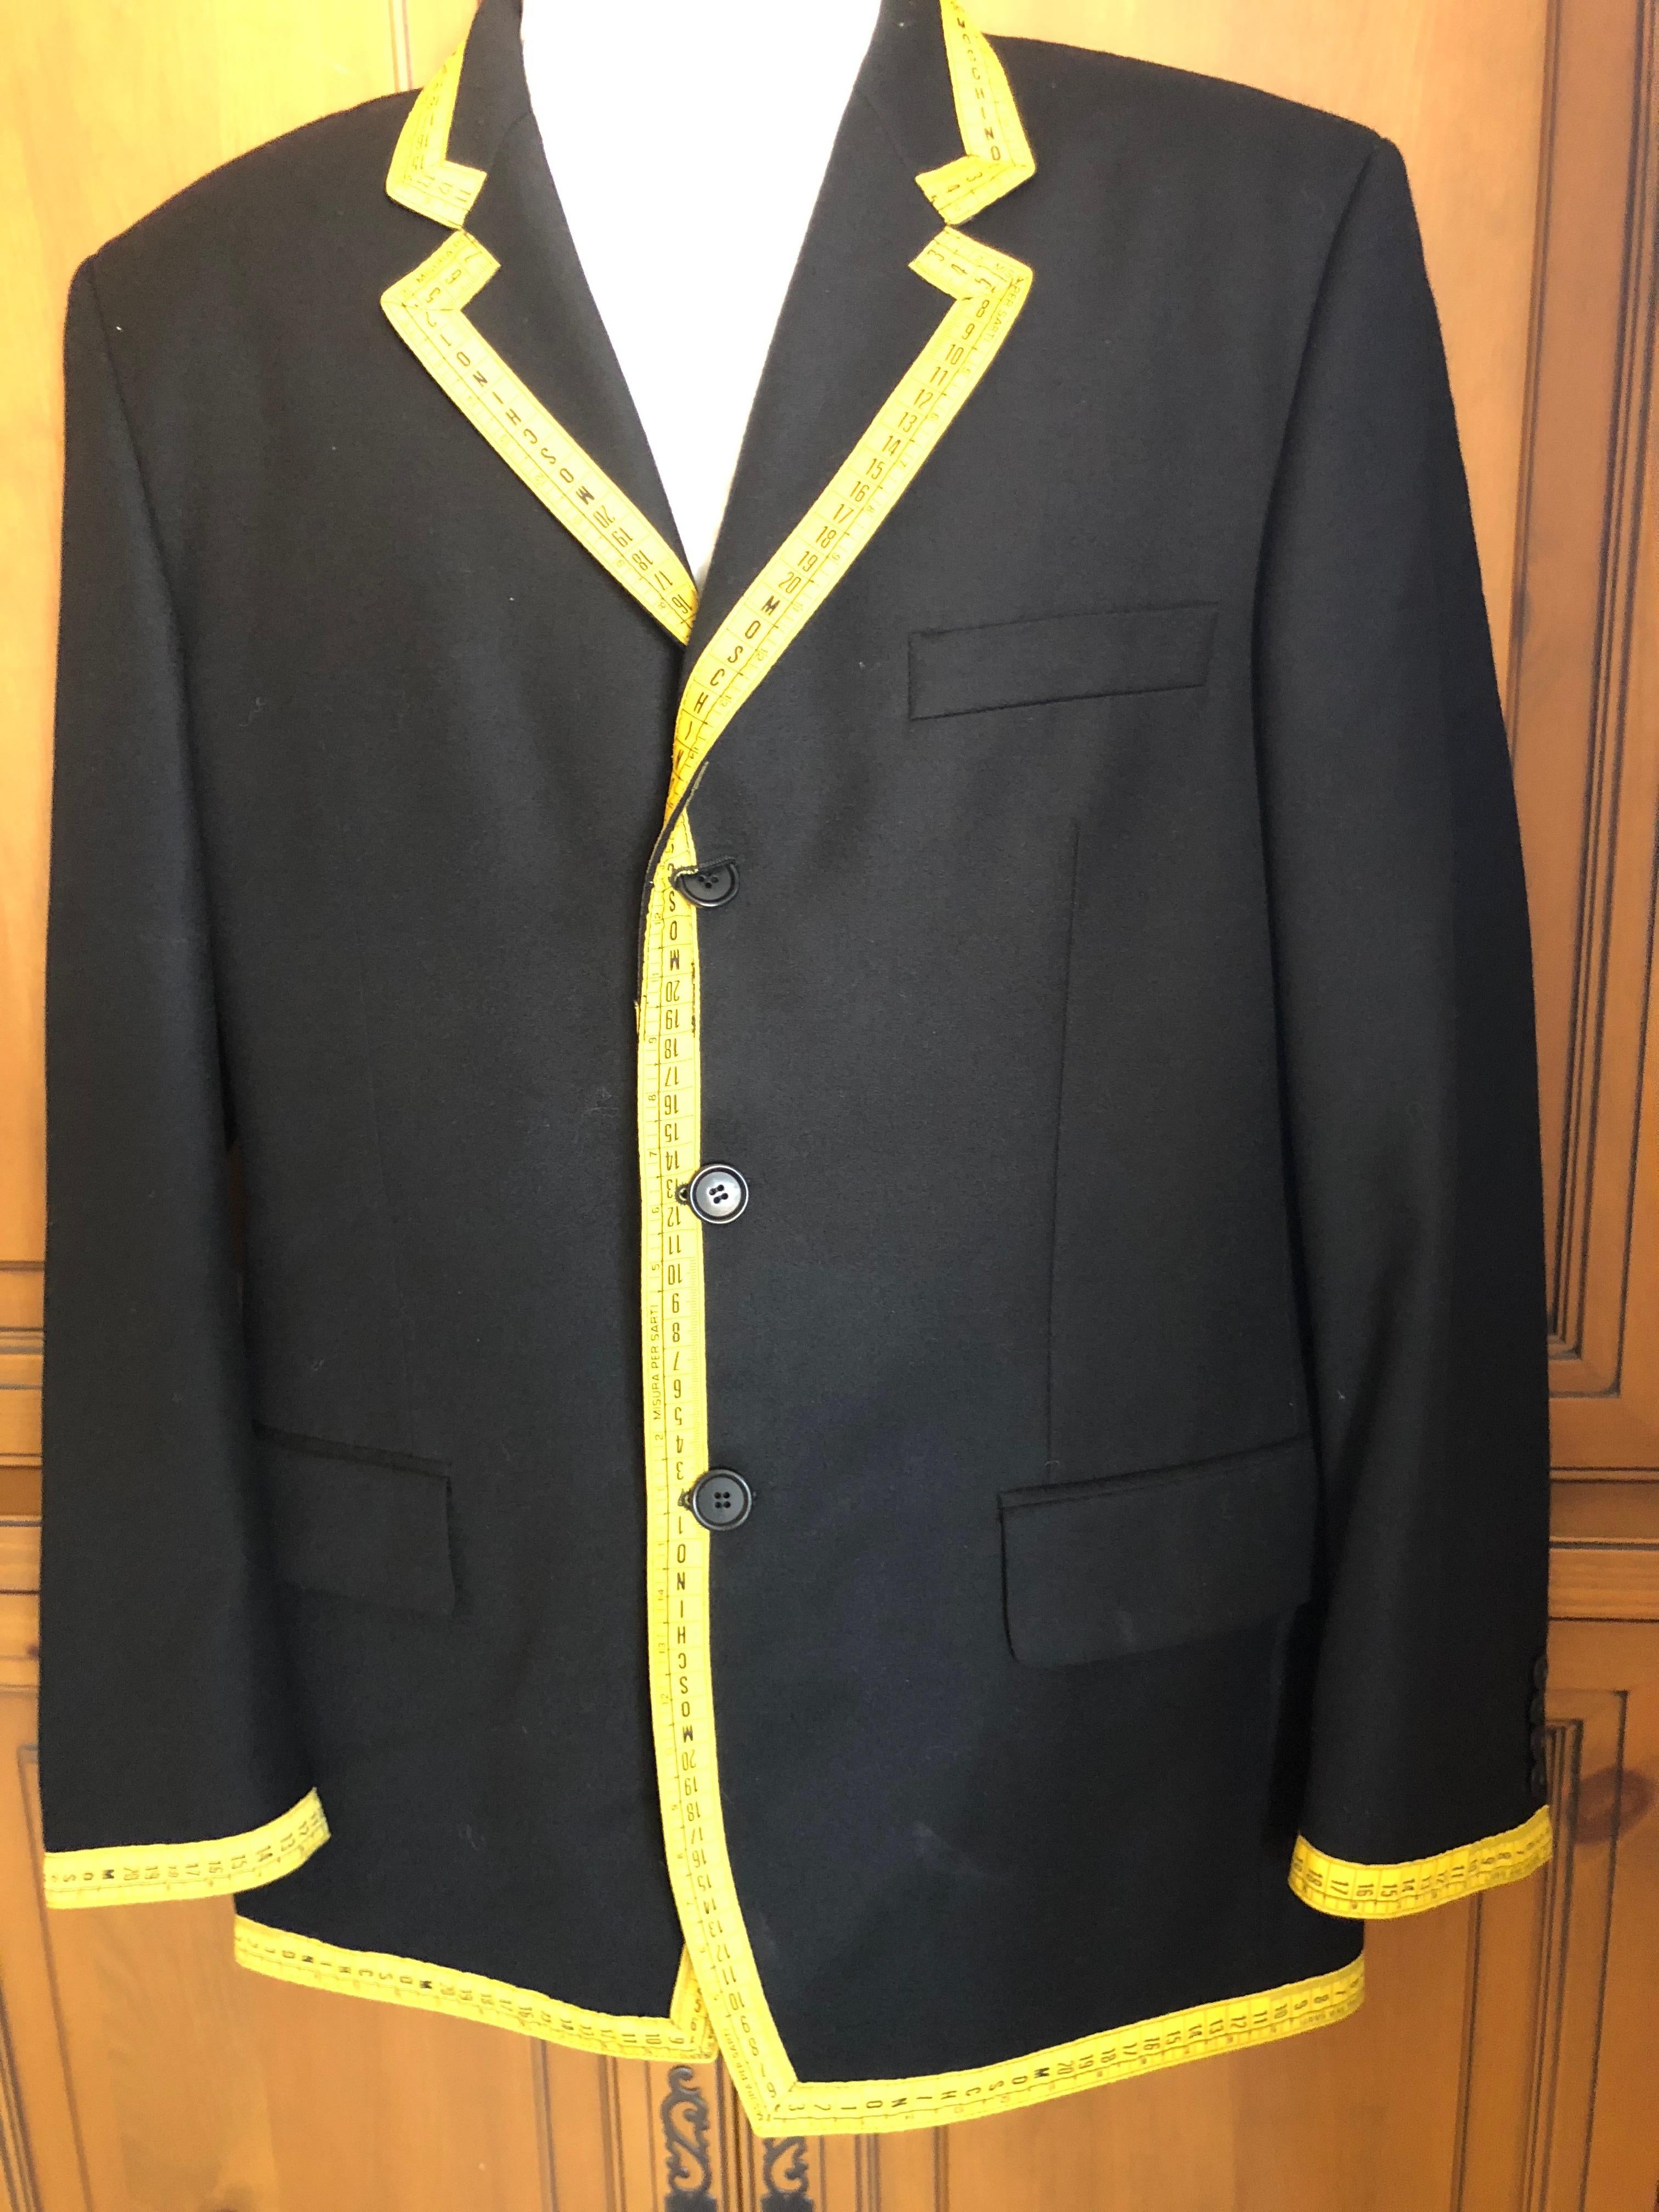 Moschino 1989 Cheap & Chic Iconic Vintage Mens Tape Measure Jacket and Vest For Sale 4